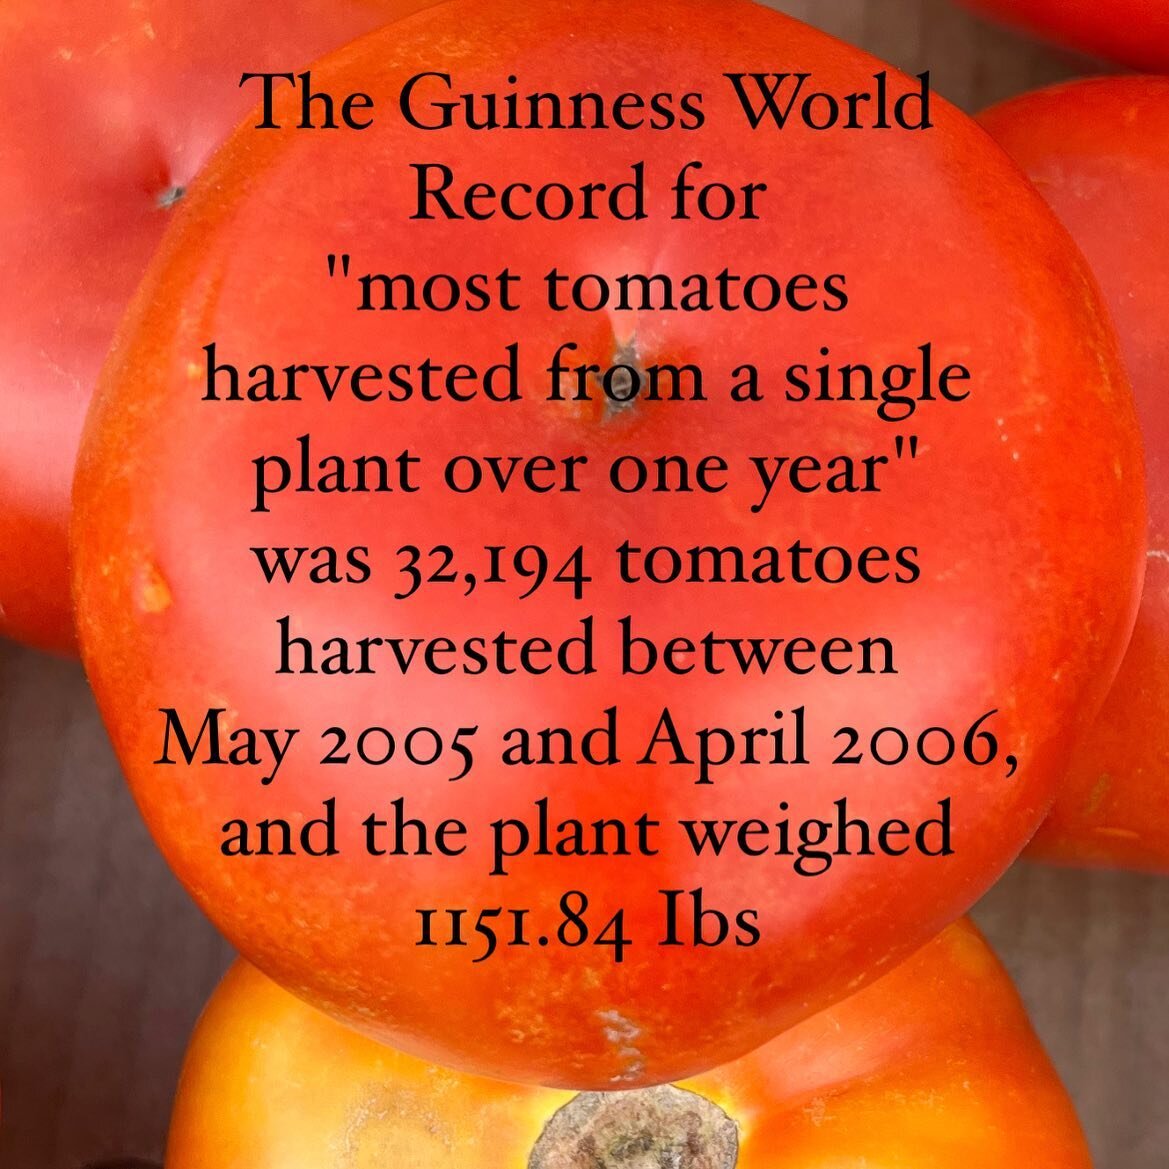 #triviatuesday 
Did you know this piece of trivia ? 
What other fun things do you know about tomatoes ?

#nativetomatoes #buylocal #localproduce #tomatoes #beefsteaktomatoes #fresh #redtomatoes #paquettefarm